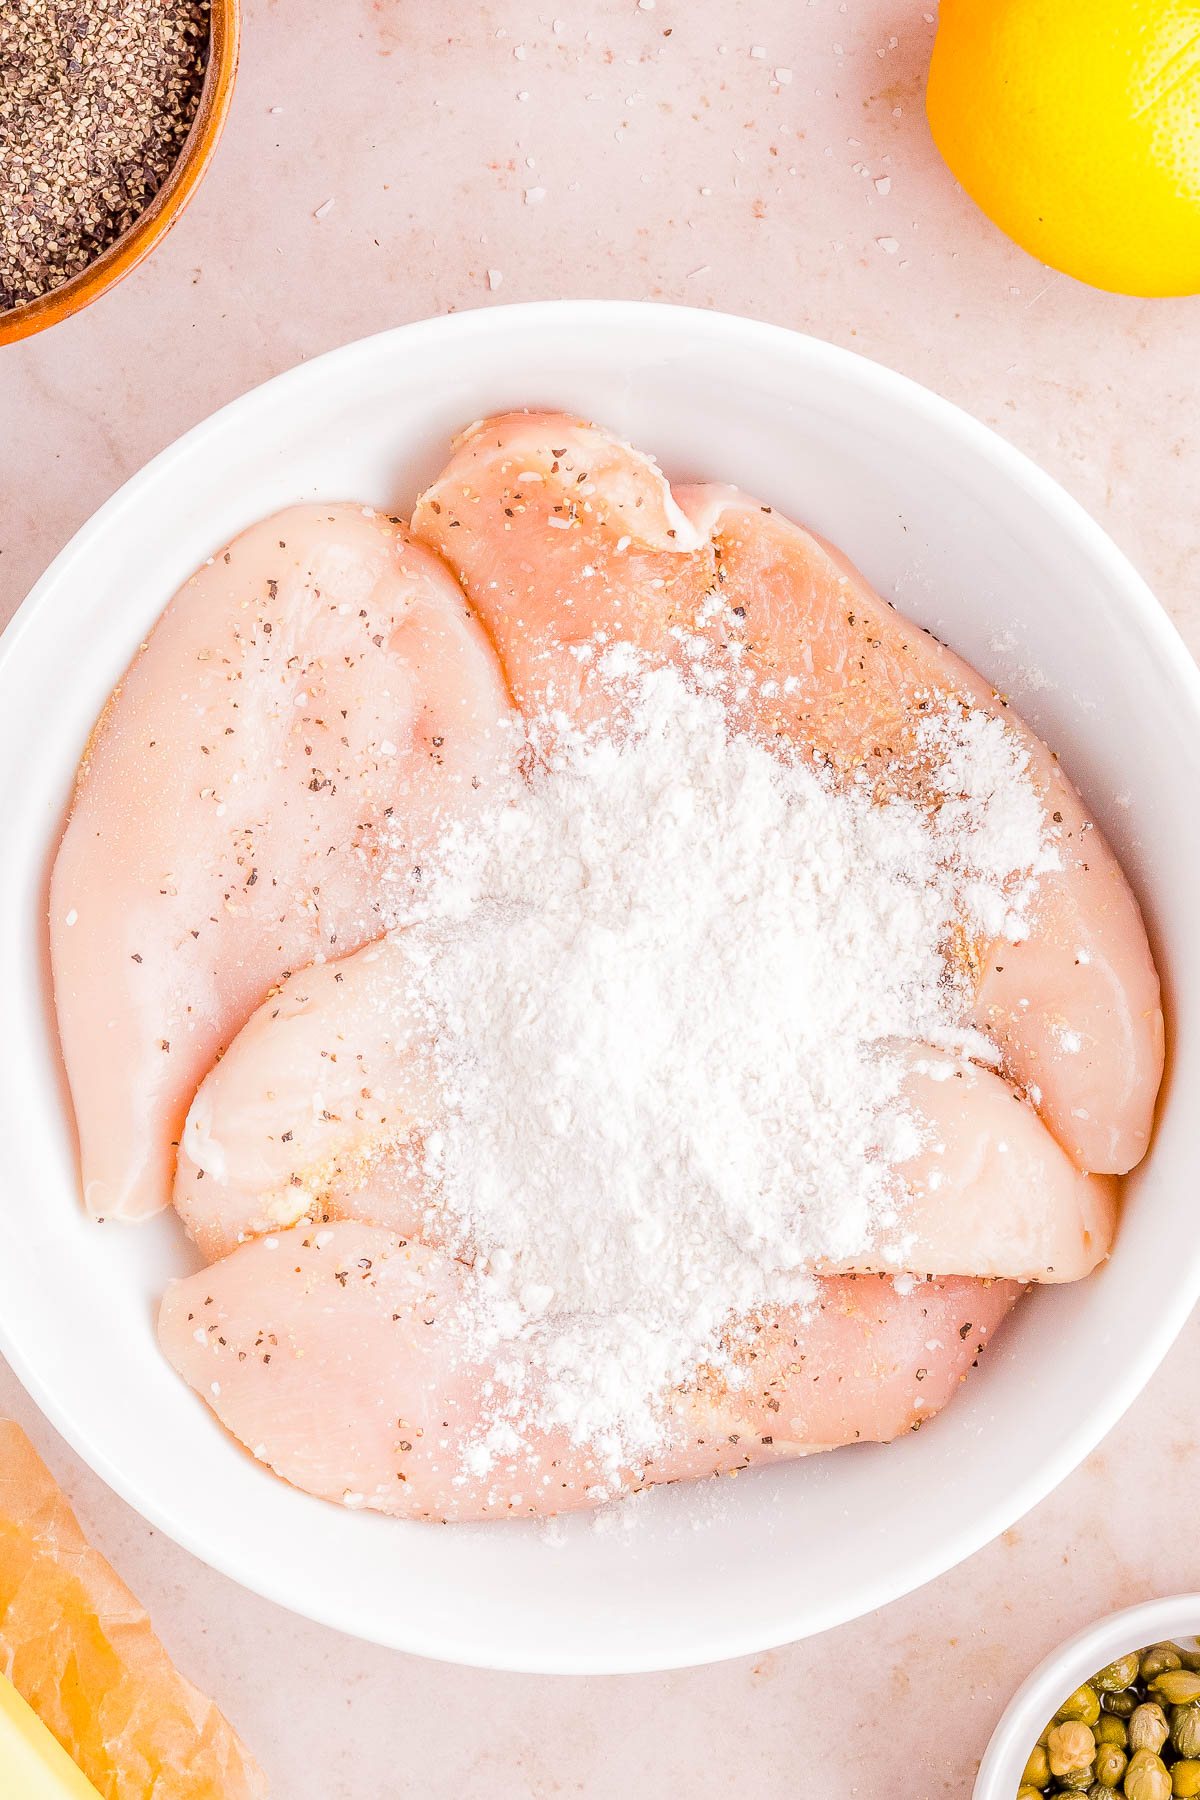 Raw chicken breasts seasoned with salt on a white plate, surrounded by cooking ingredients.